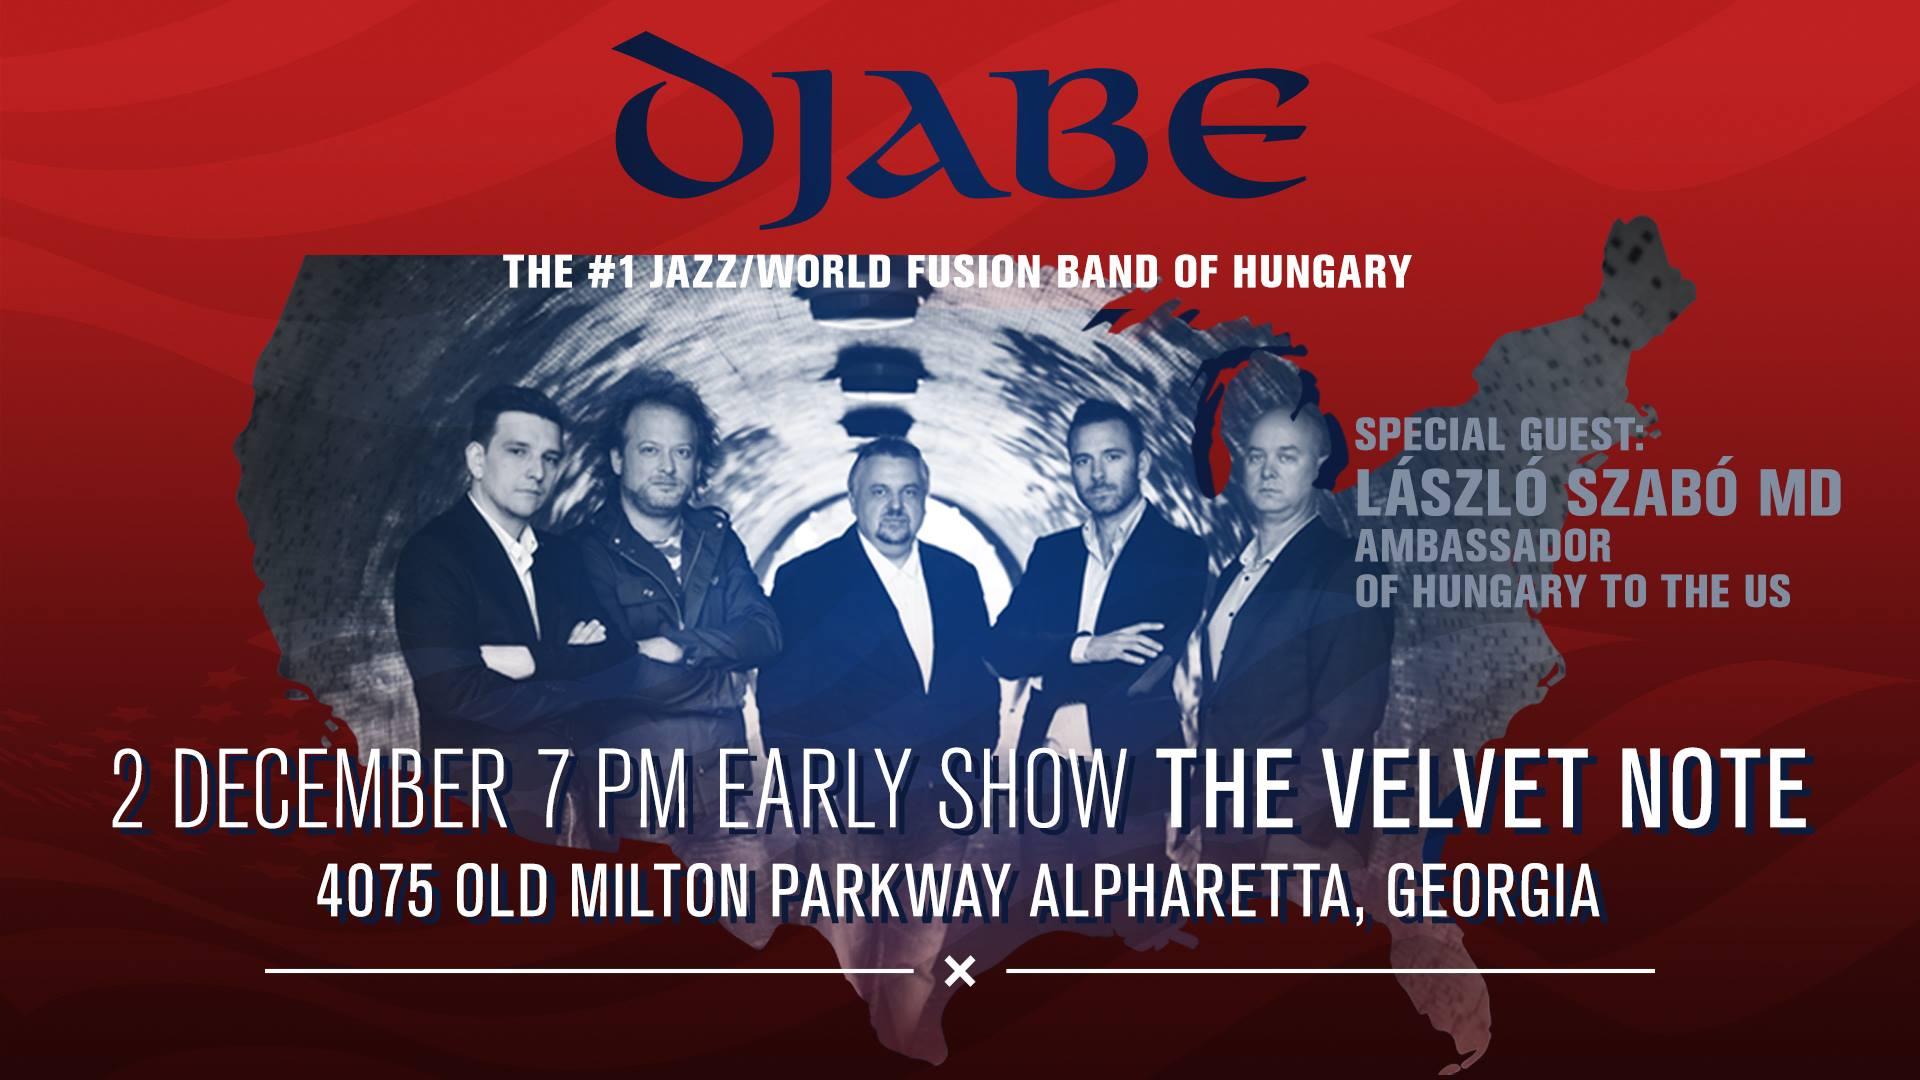 World Renowned Jazz Fusion Band From Hungary Djabe Concert